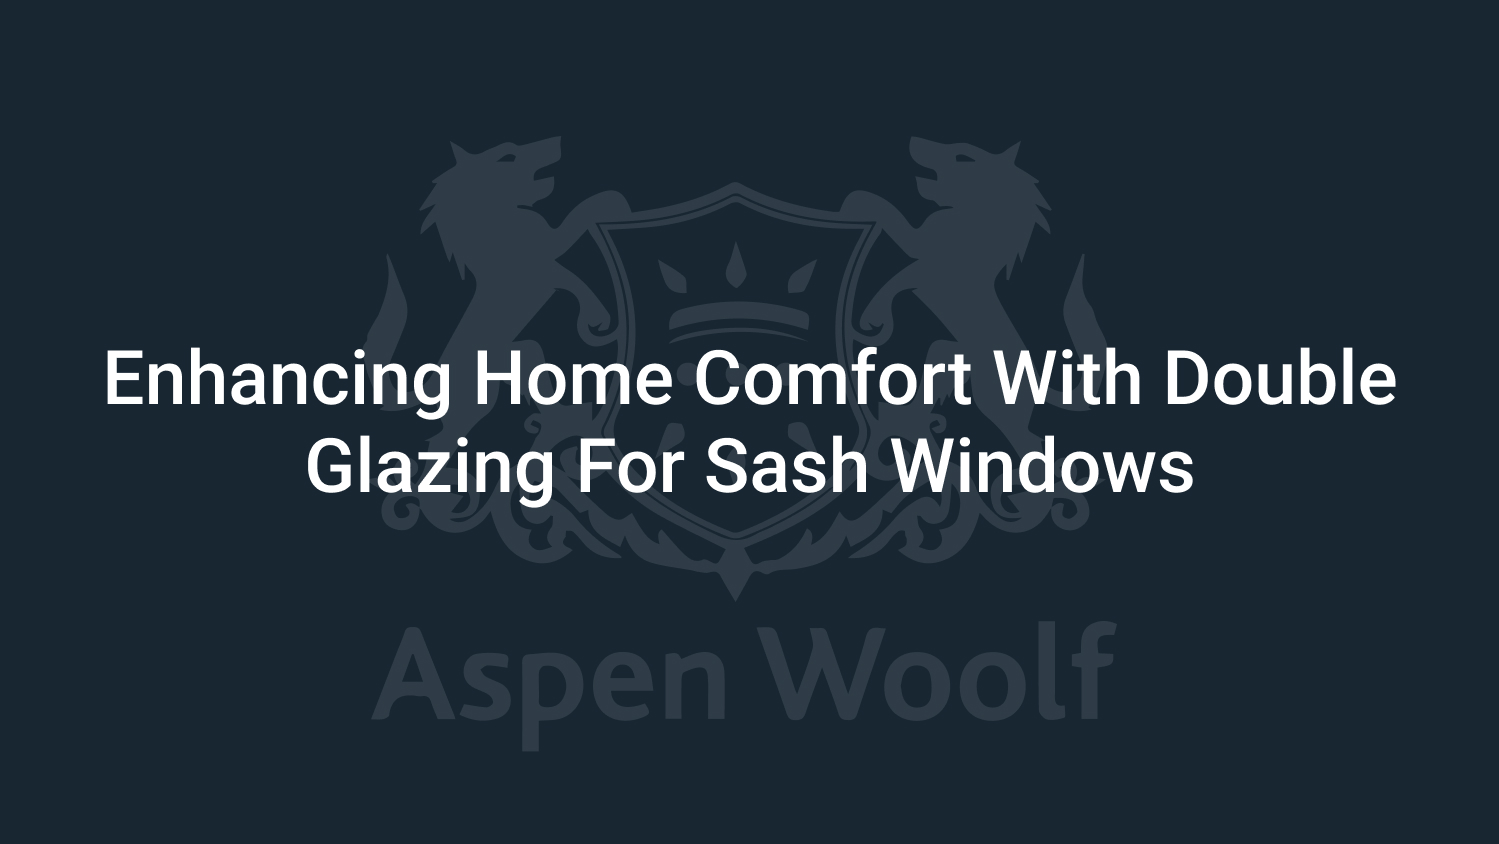 Enhancing home comfort with double glazing for sash windows